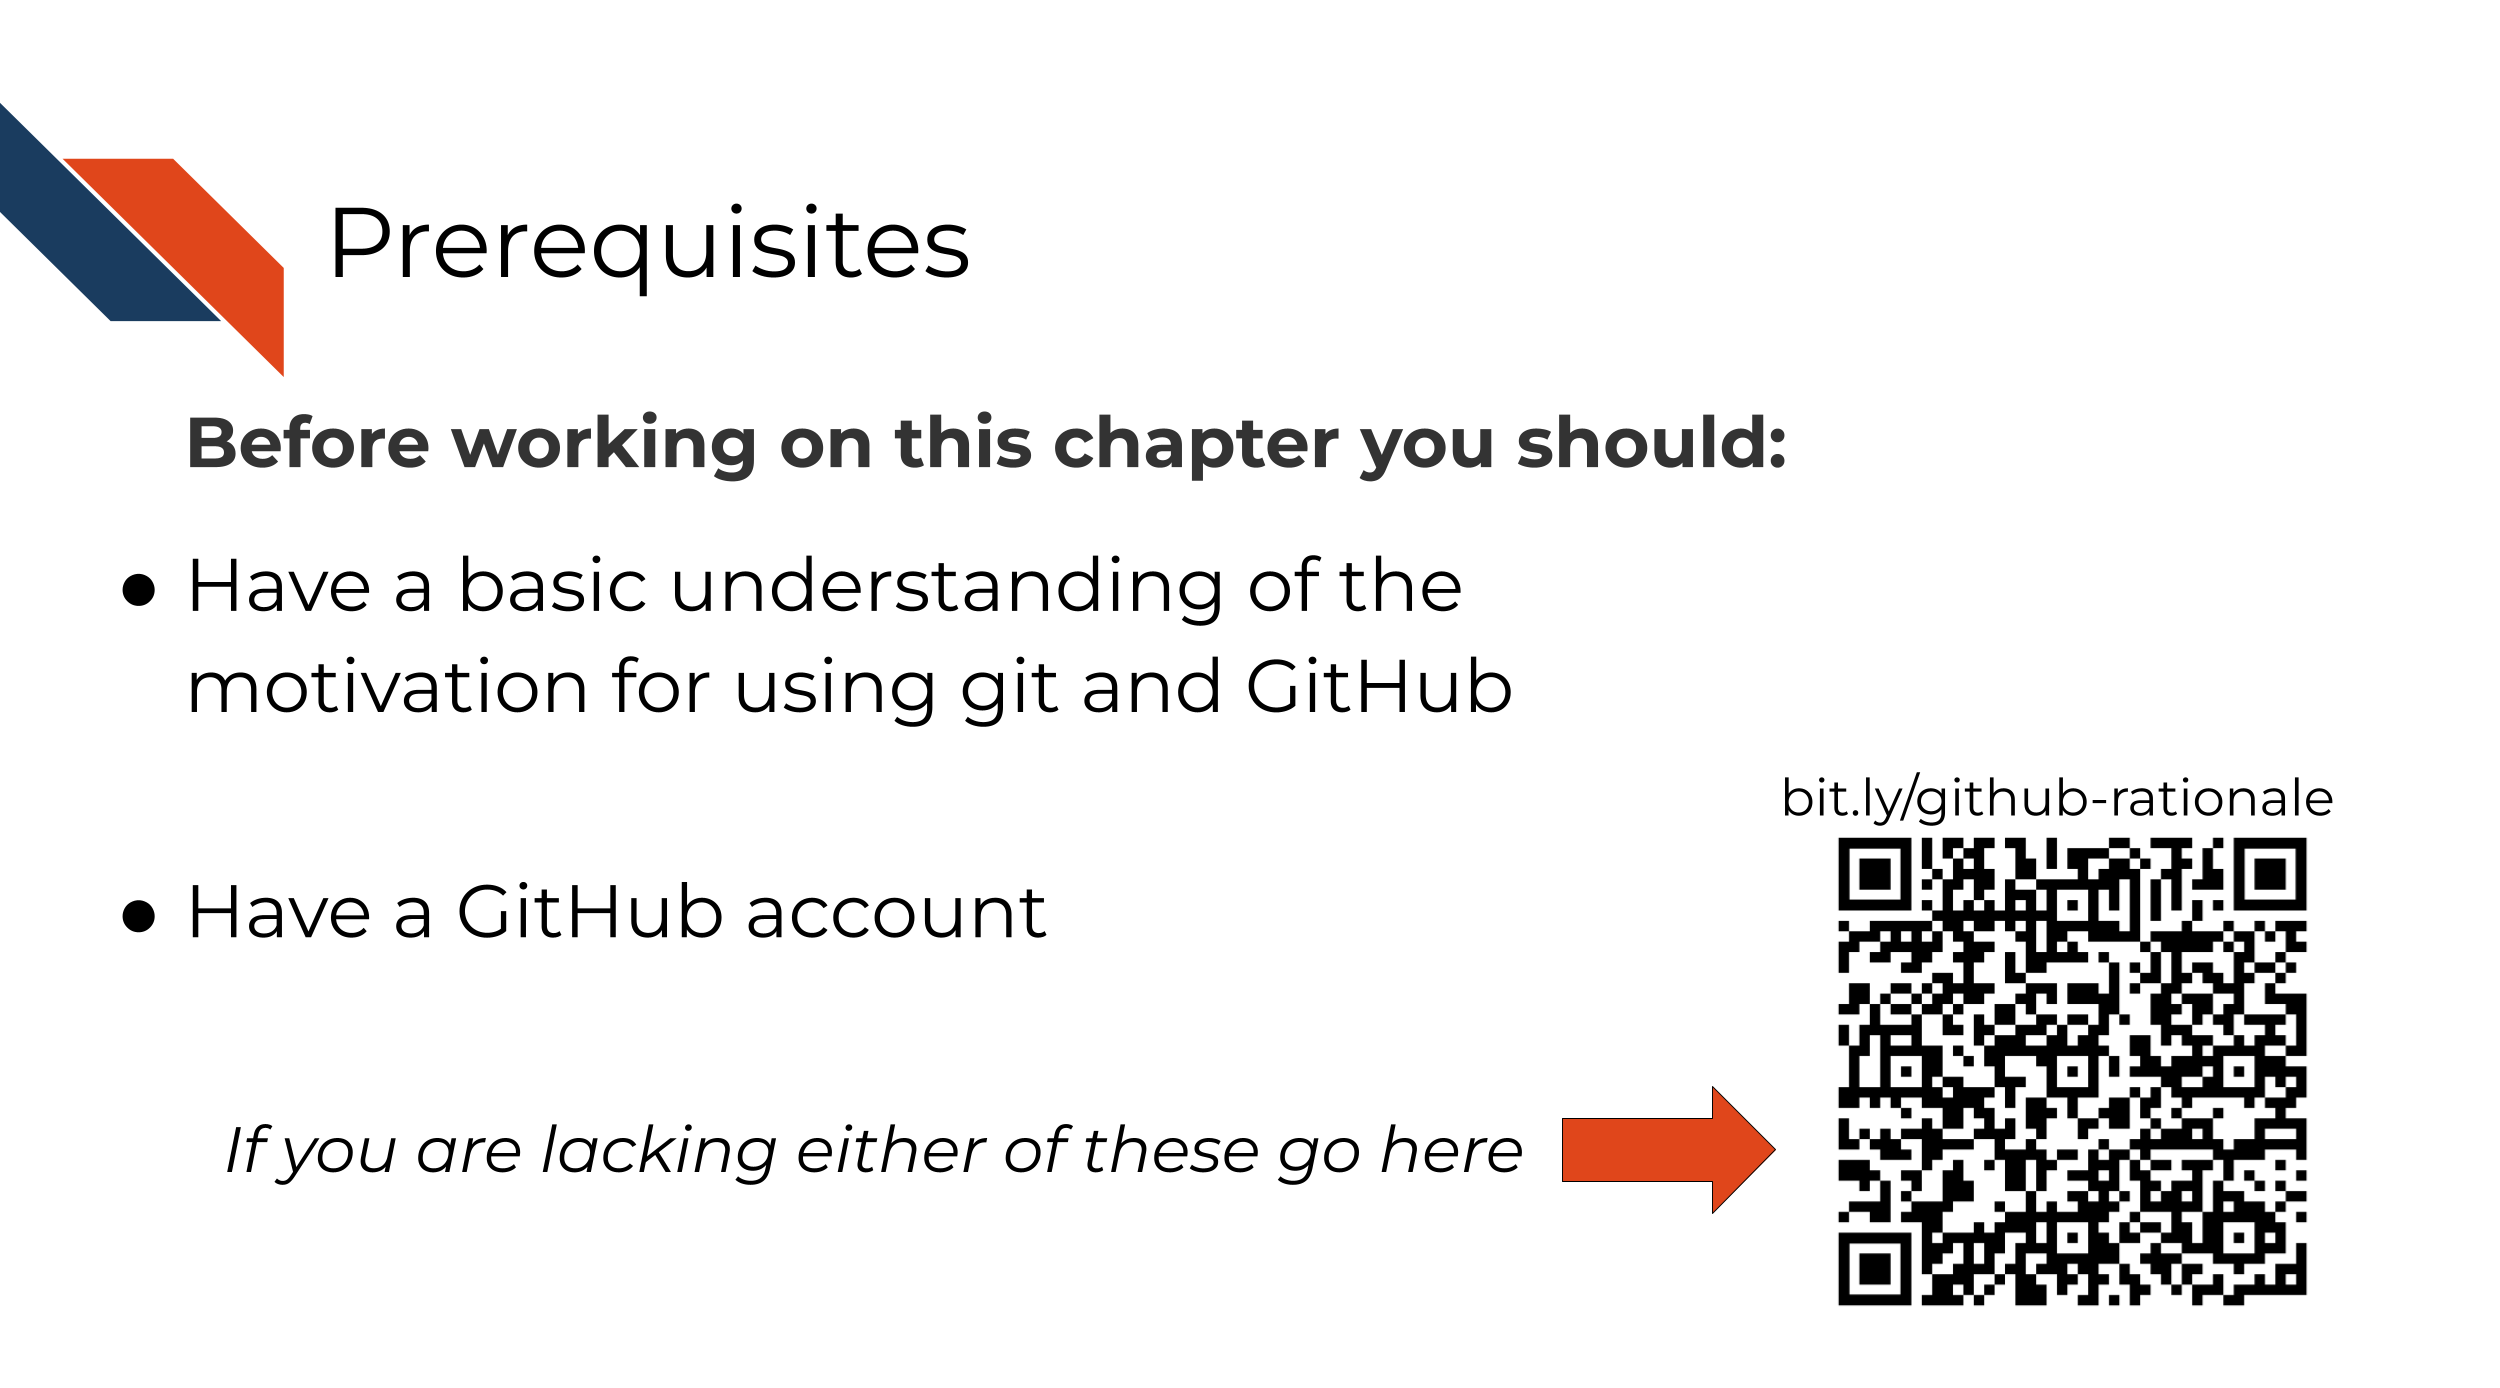 This chapter has Prerequisites. Before working on this chapter you should: Have a basic understanding of the motivation for using git and GitHub and Have a GitHub account. If you are lacking either of these, you can scan this QR code, or go to bit.ly/github-rationale